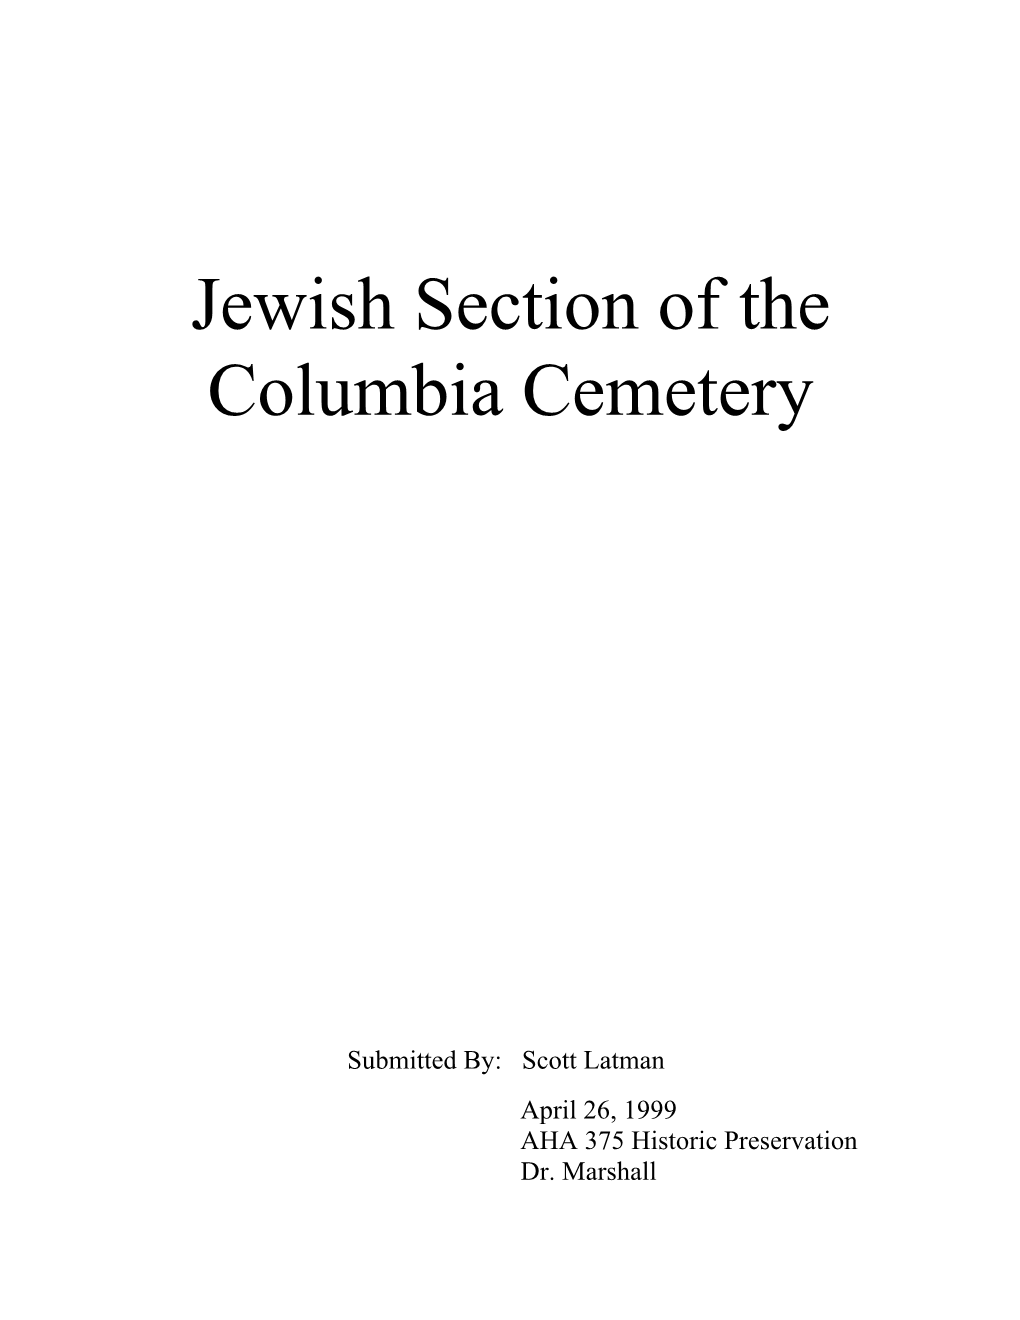 Jewish Section of the Columbia Cemetery